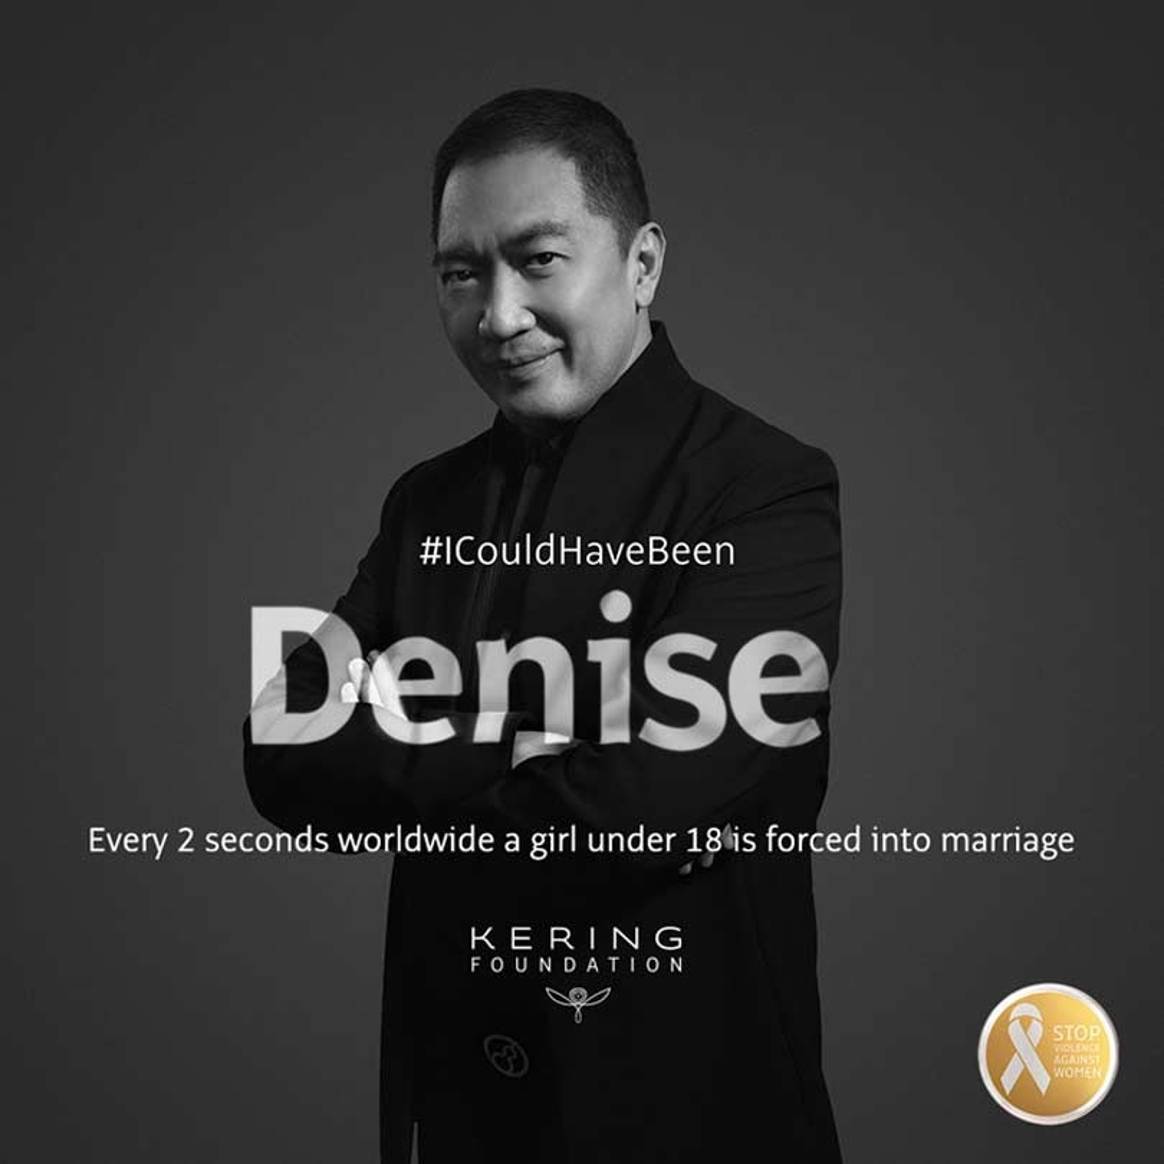 #ICouldHaveBeen: Kering Foundation campaigns to end violence against women